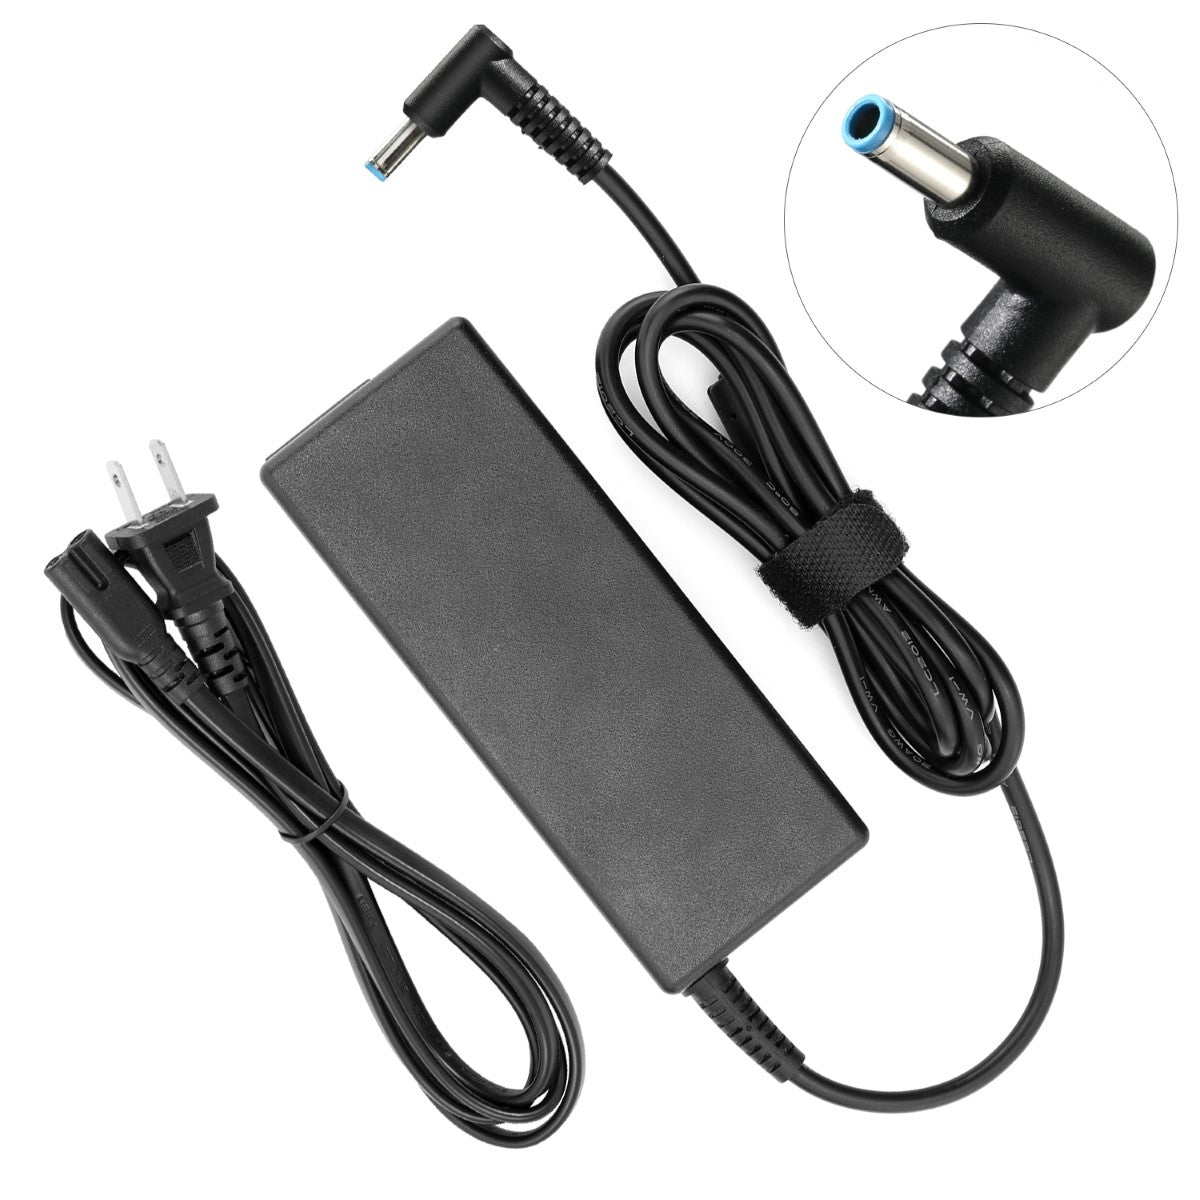 AC Adapter Charger for HP 15-g033ds.